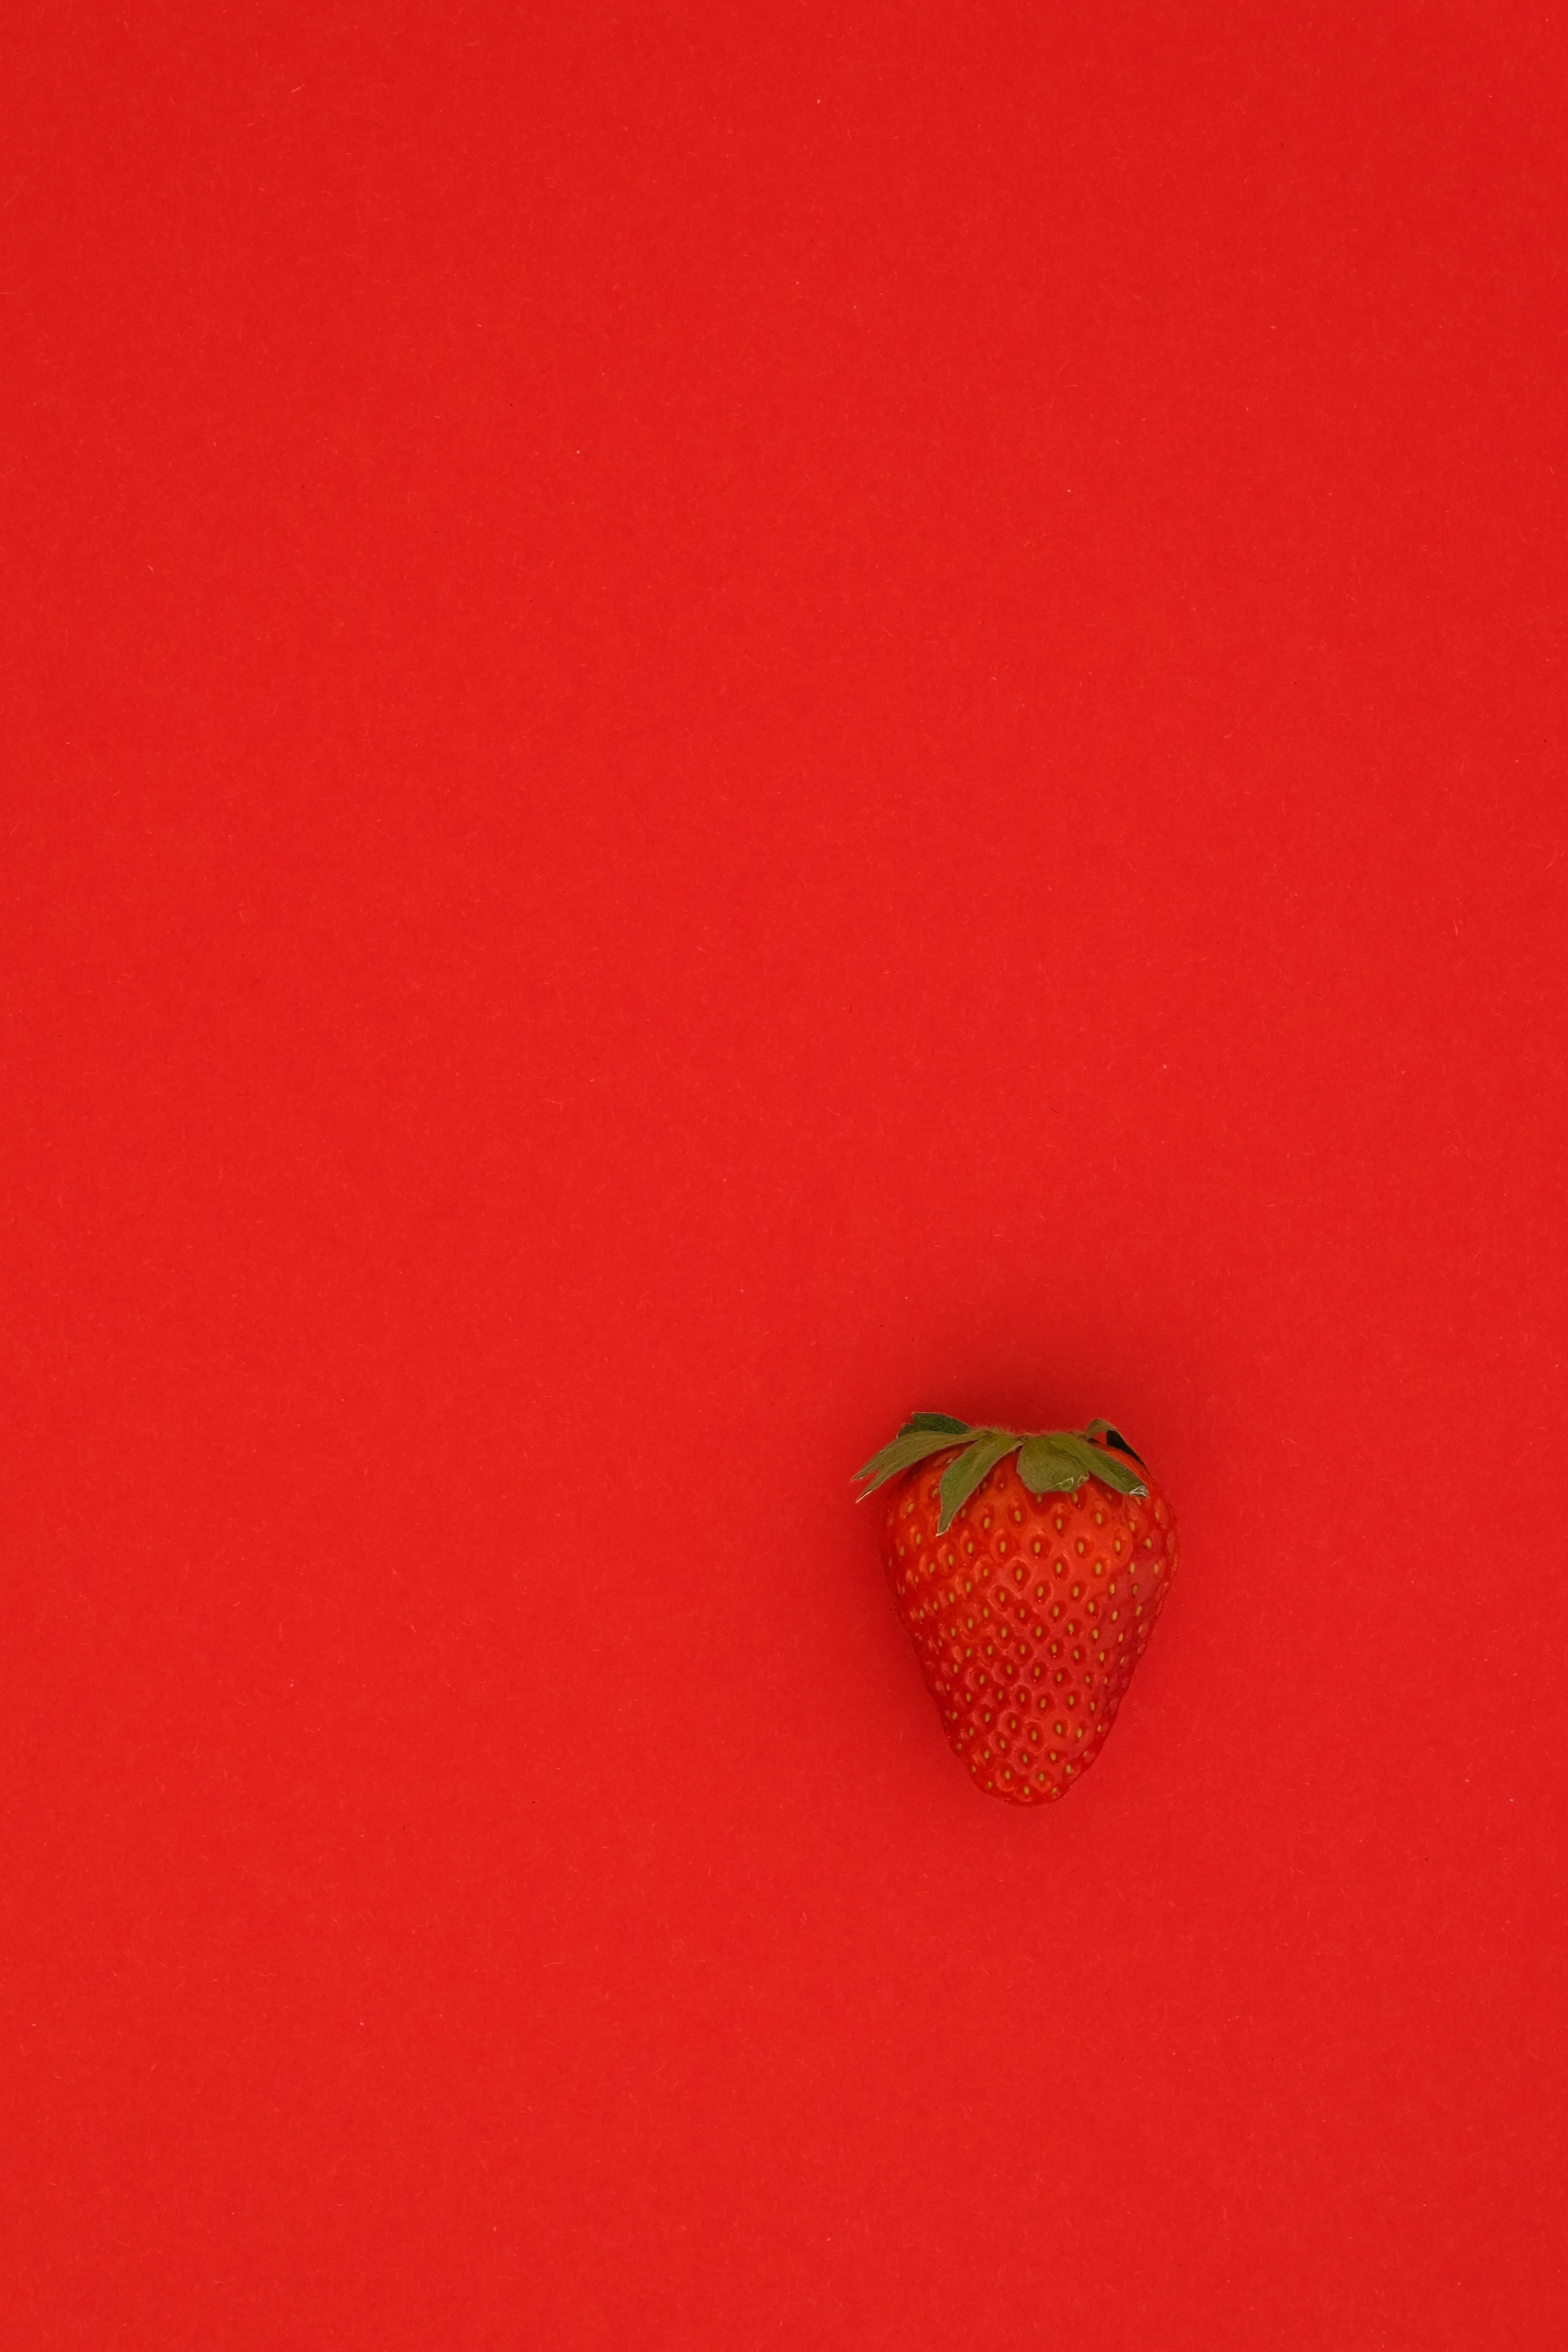 strawberry, red background, berry, food phone wallpaper